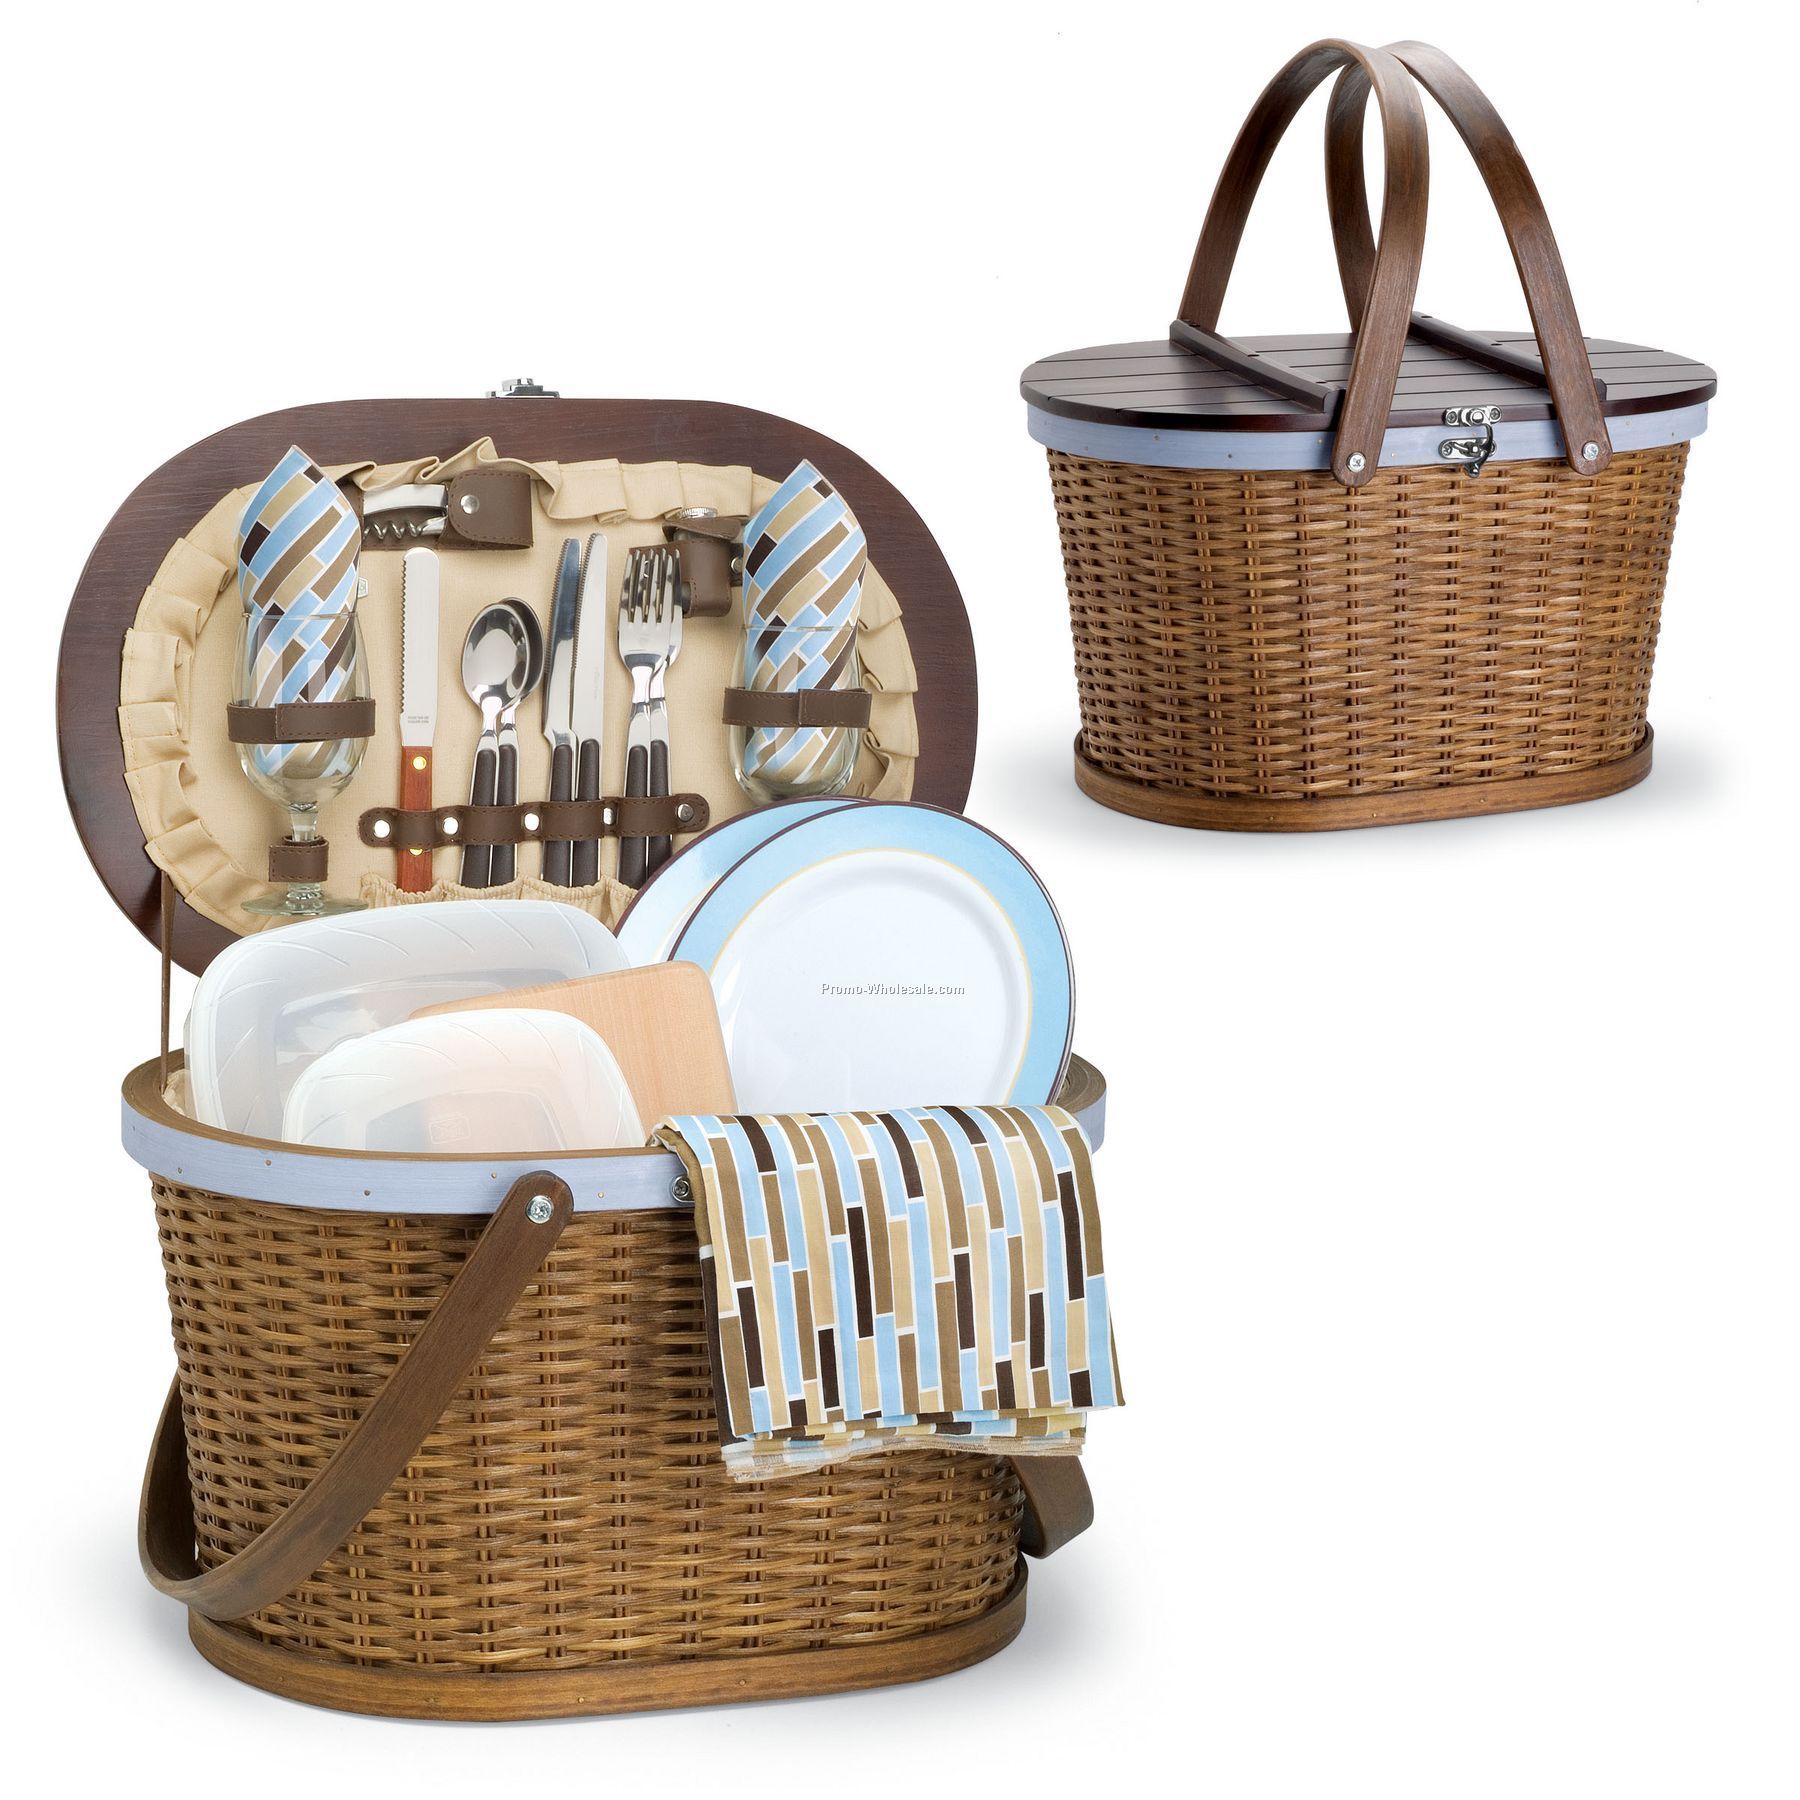 Catalina - Driftwood Classic Oval Picnic Basket With Service For 2